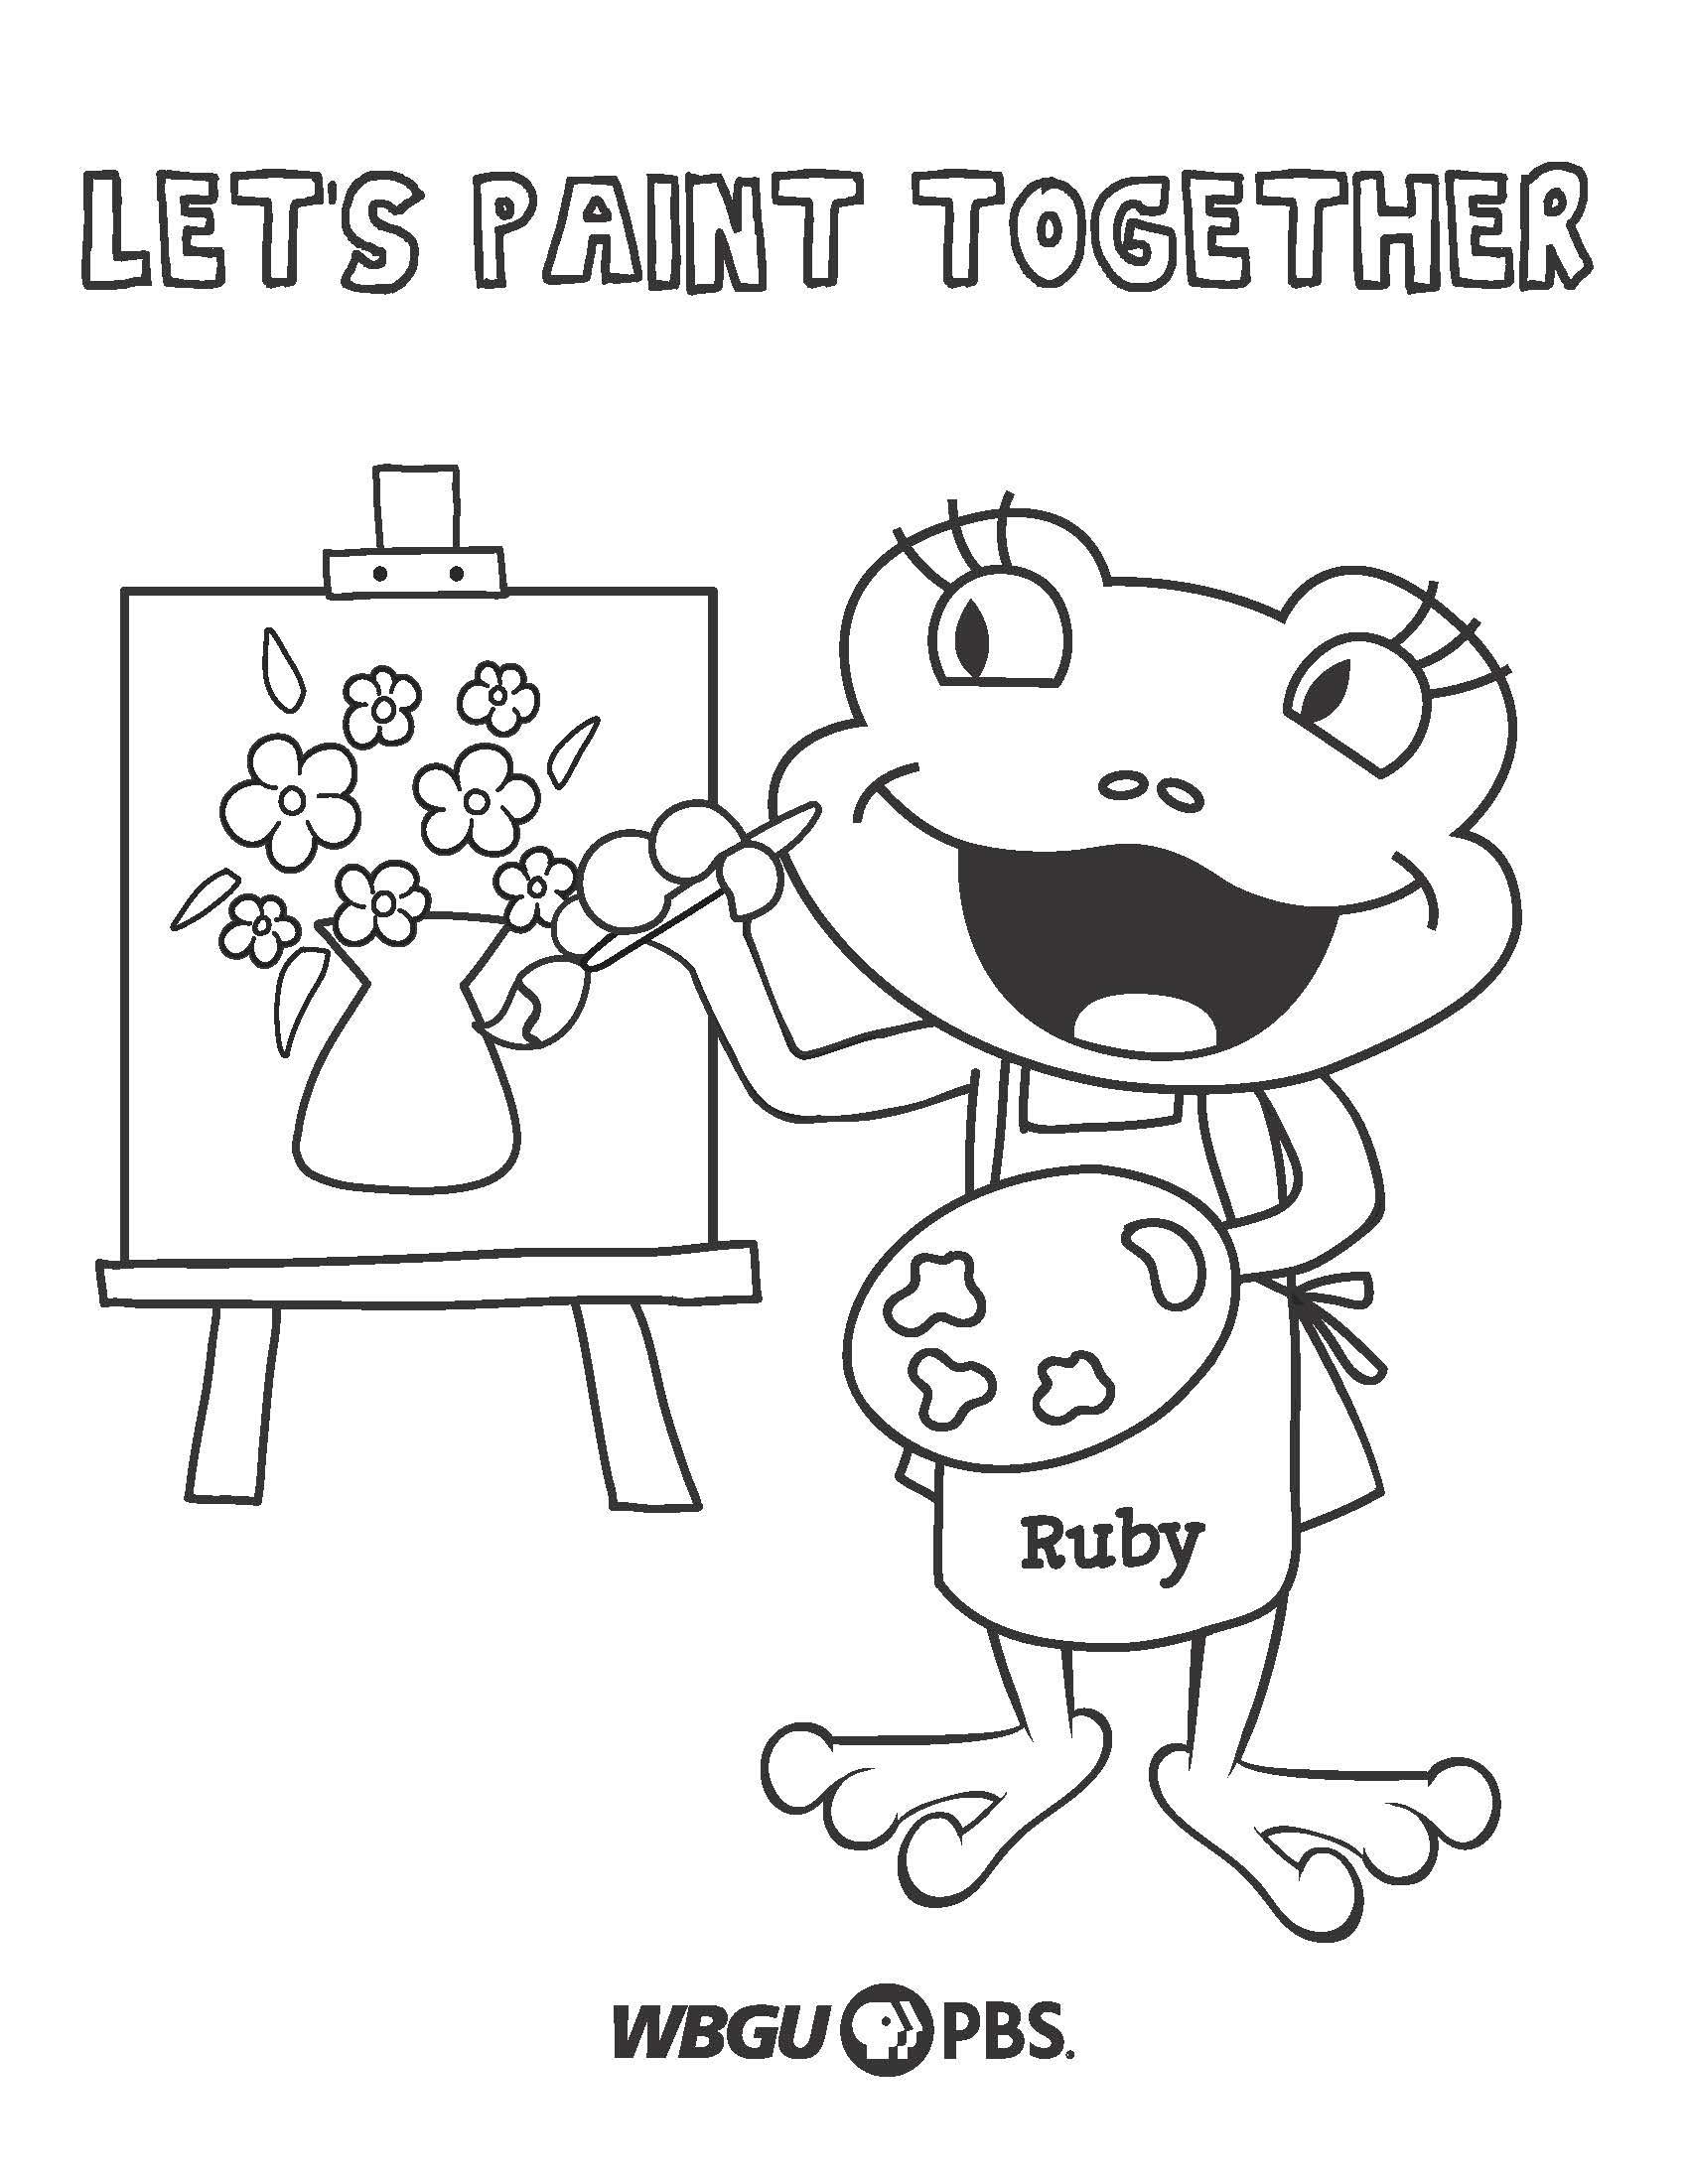 Let's Paint Together PDF downloadable printout for coloring-painting